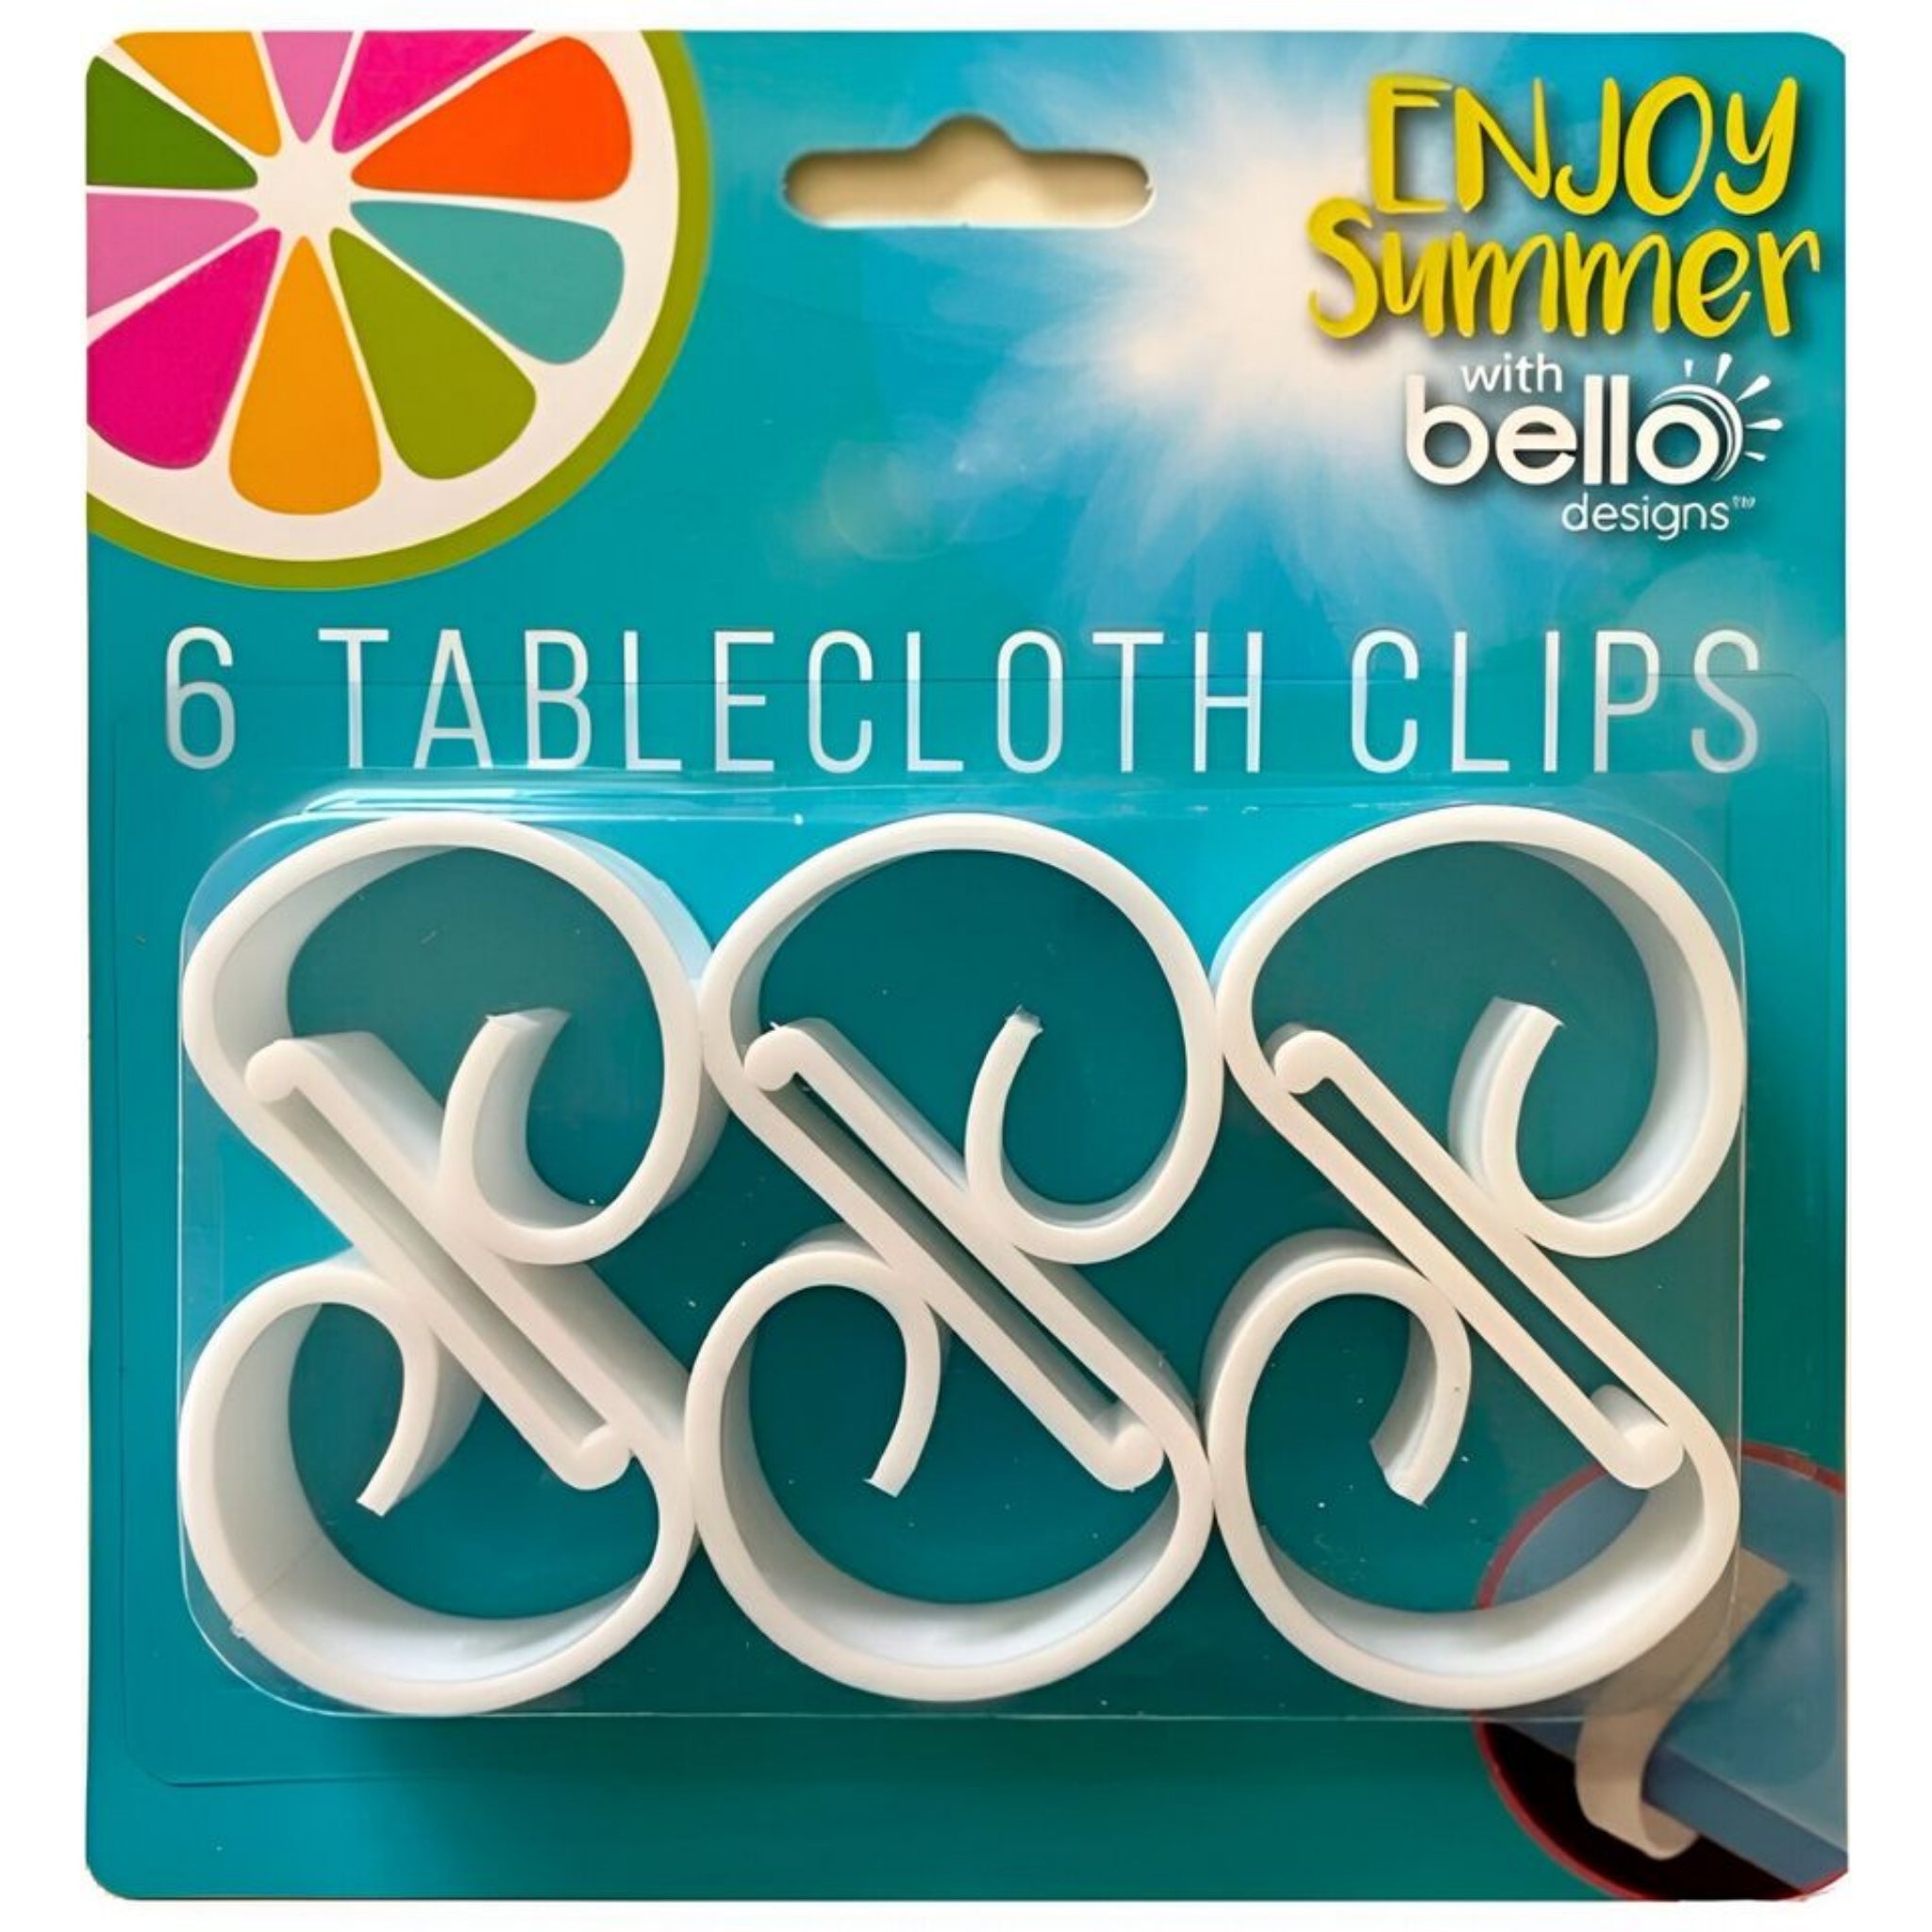 Beclen Harp 6 x Tablecloth Clips Plastic Clamps Dining BBQ / Garden Patio Table Cover Clips